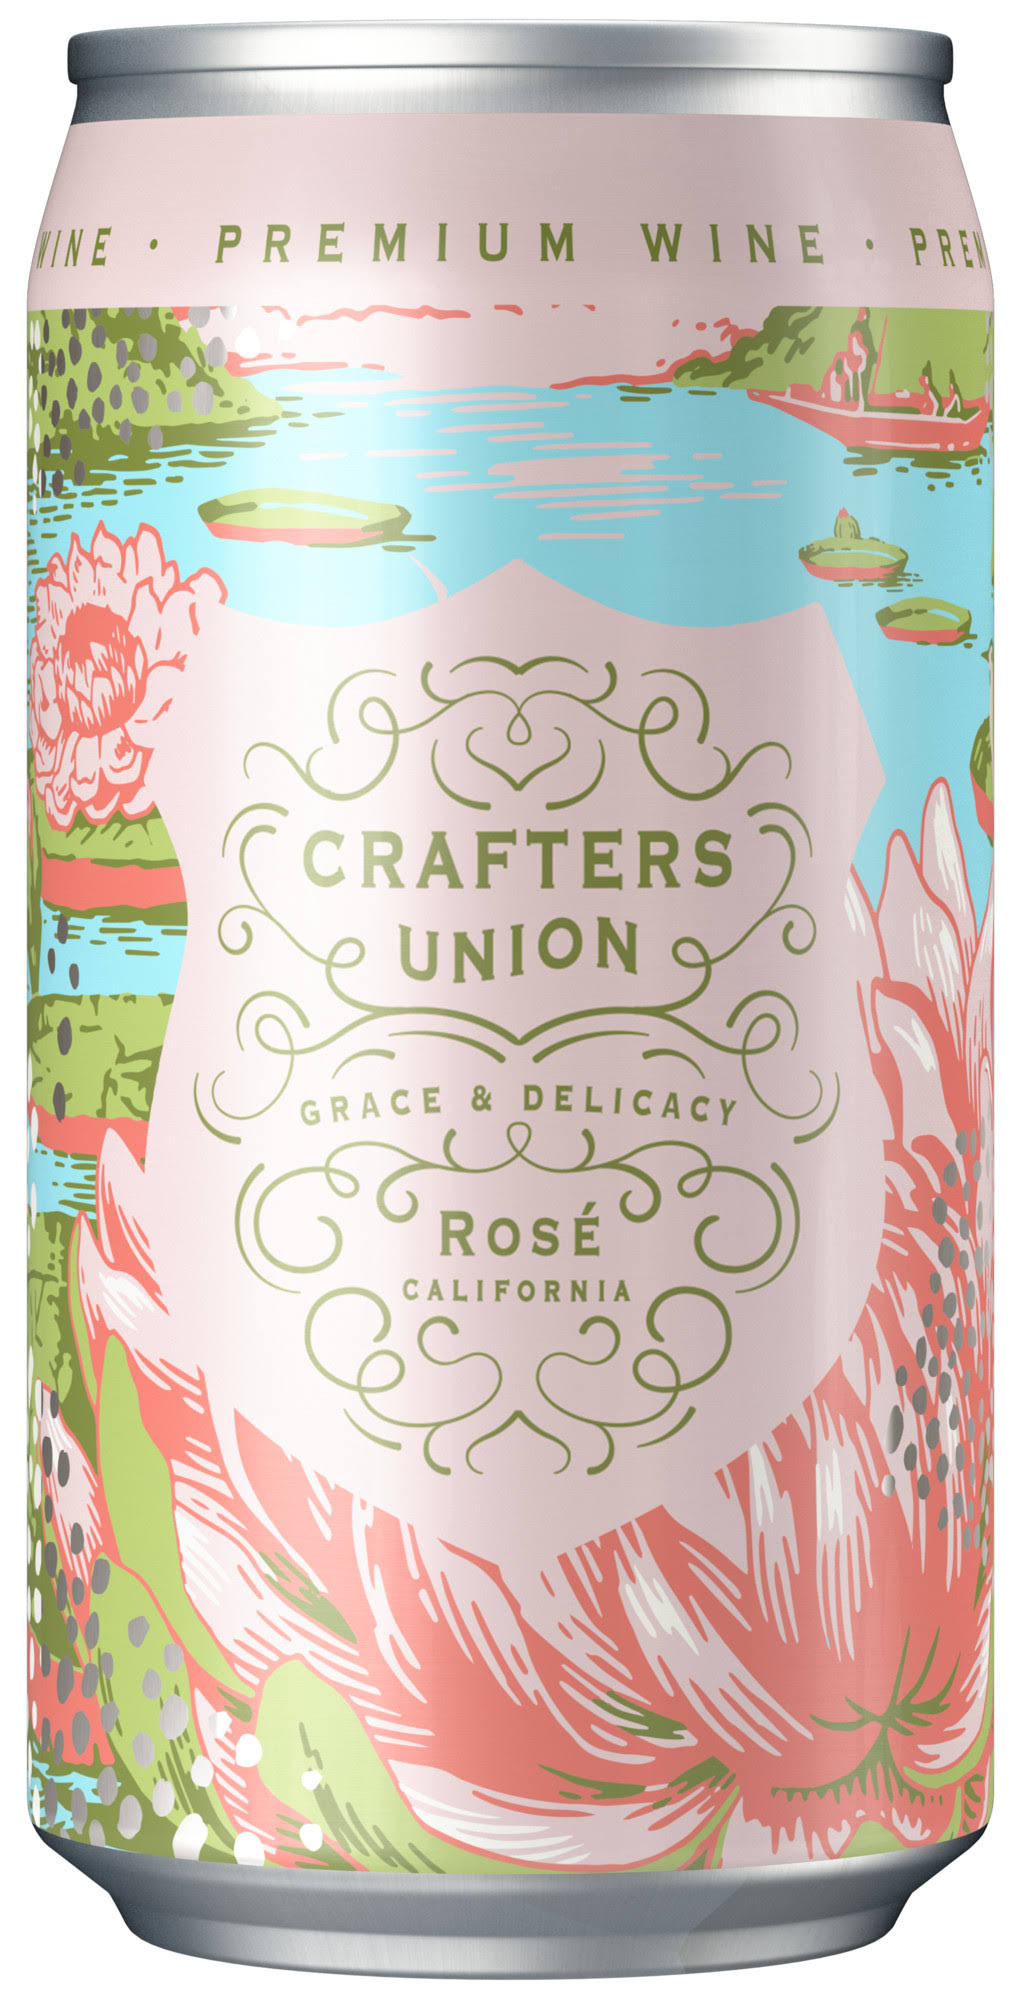 Crafters Union Rose, California - 375 ml